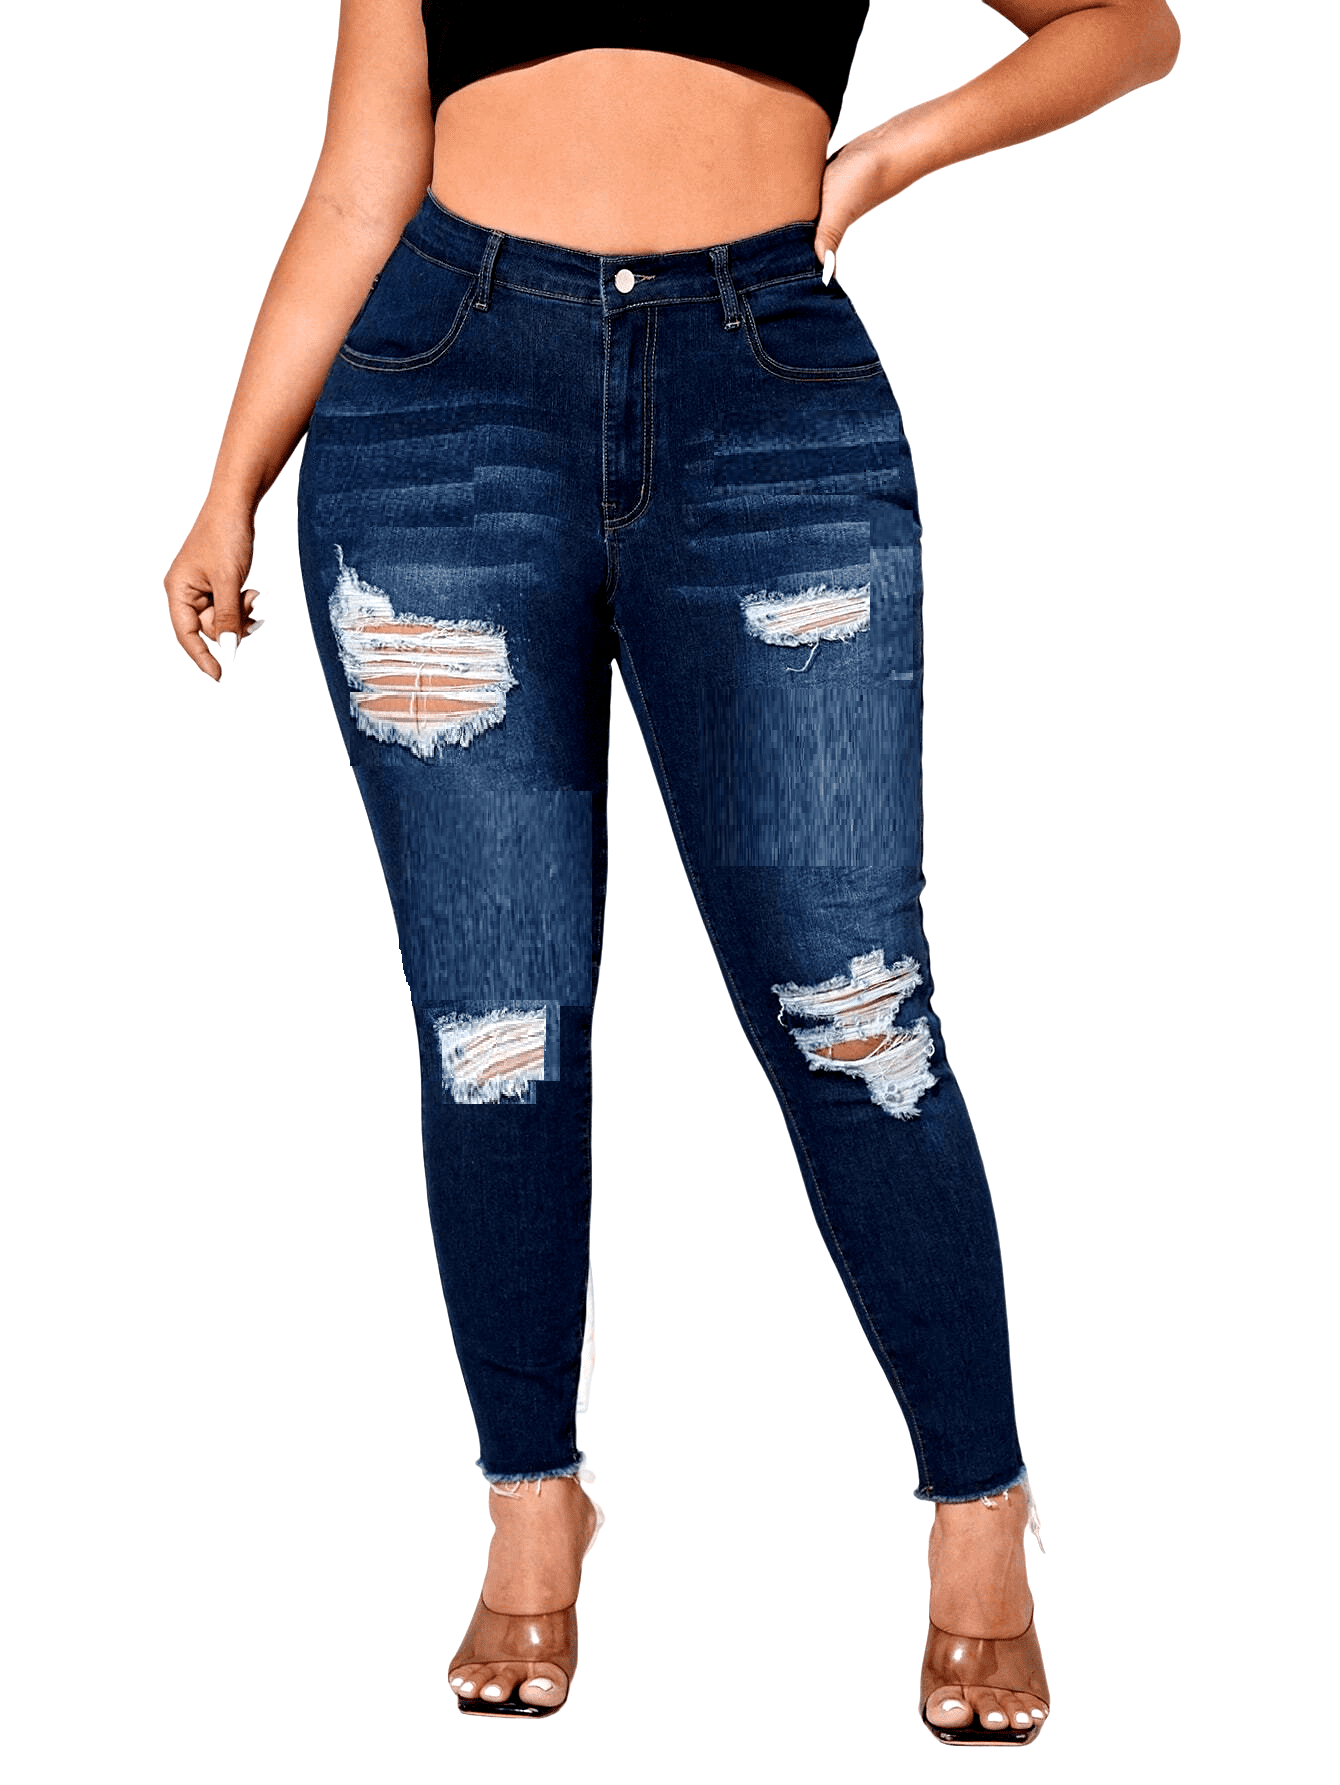 Womens Jean Size 16 Pants for Women Women High Waisted Ripped Boyfriend  Slim Fit Jeans Frayed Distressed Stretchy Denim Pants Women plus Size Jean